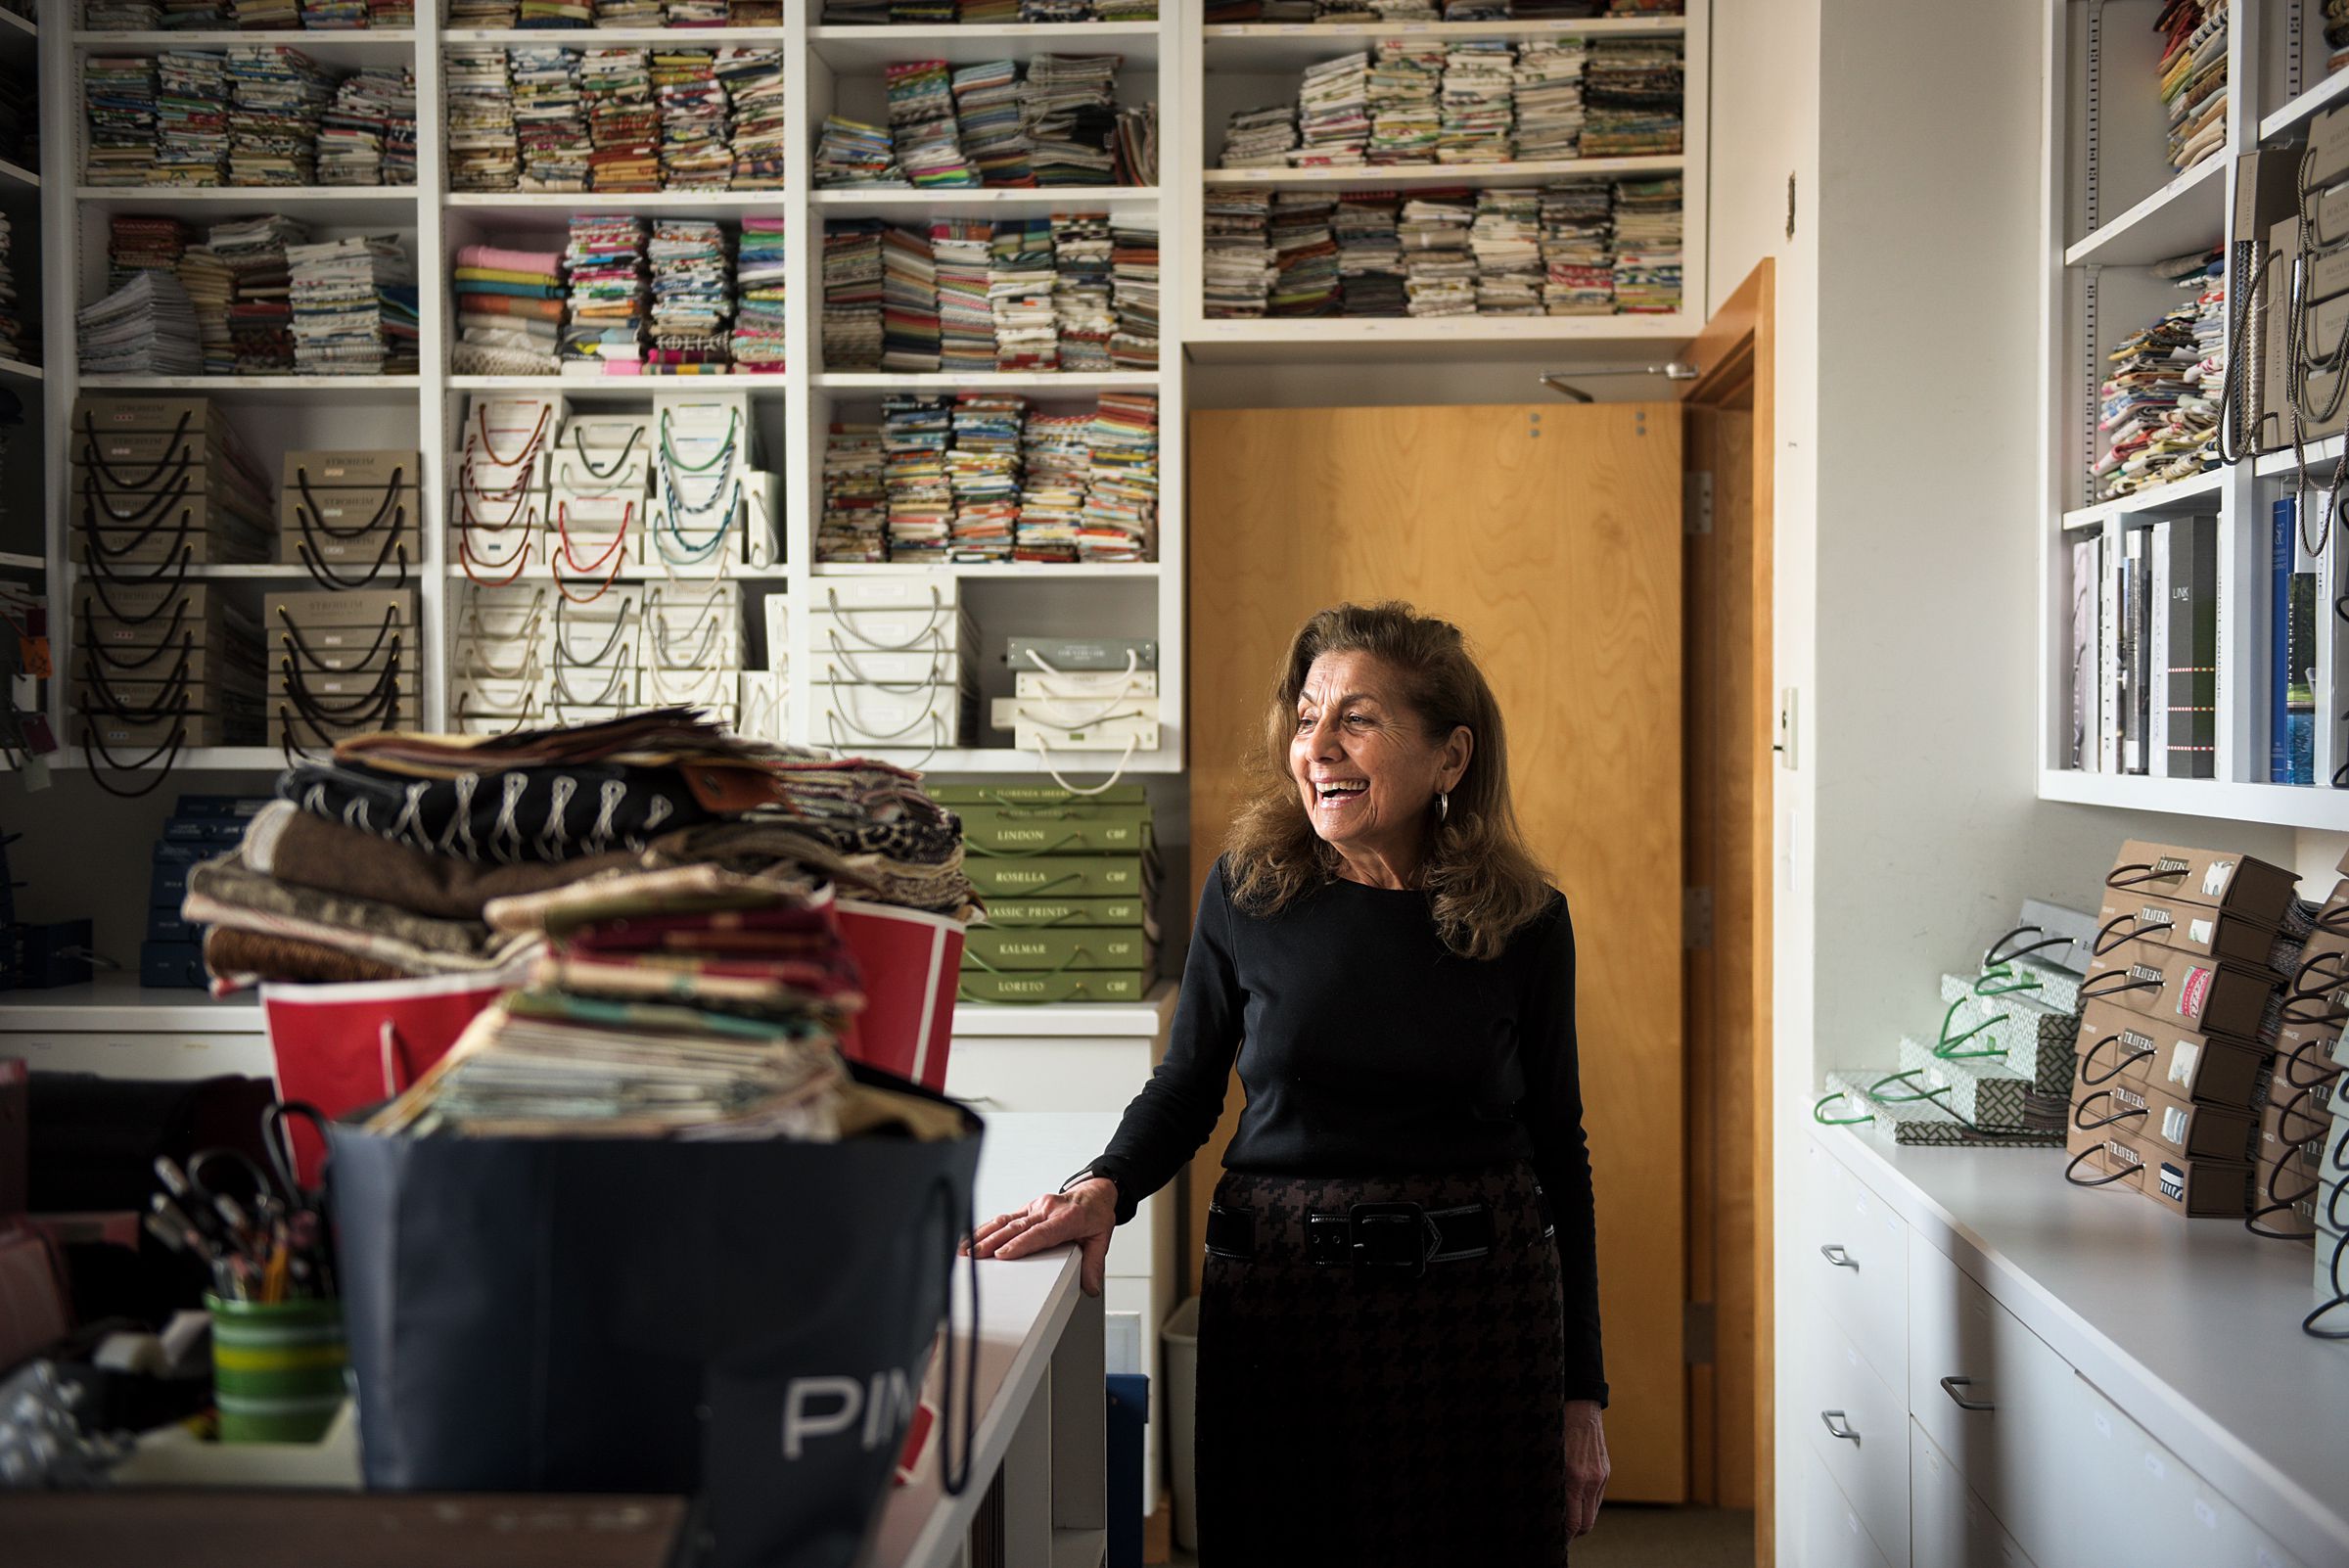 Gilberte Boghosian started a drapery and upholstery business more than 50 years ago with her husband, Antranig, and they gradually grew into doing design services and offering custom fabrics and furniture. Boghosian stood for a portrait at the Hanover, N.H., headquarters of the business on Thursday, Jan. 10, 2019. (Valley News - James M. Patterson) Copyright Valley News. May not be reprinted or used online without permission. Send requests to permission@vnews.com.